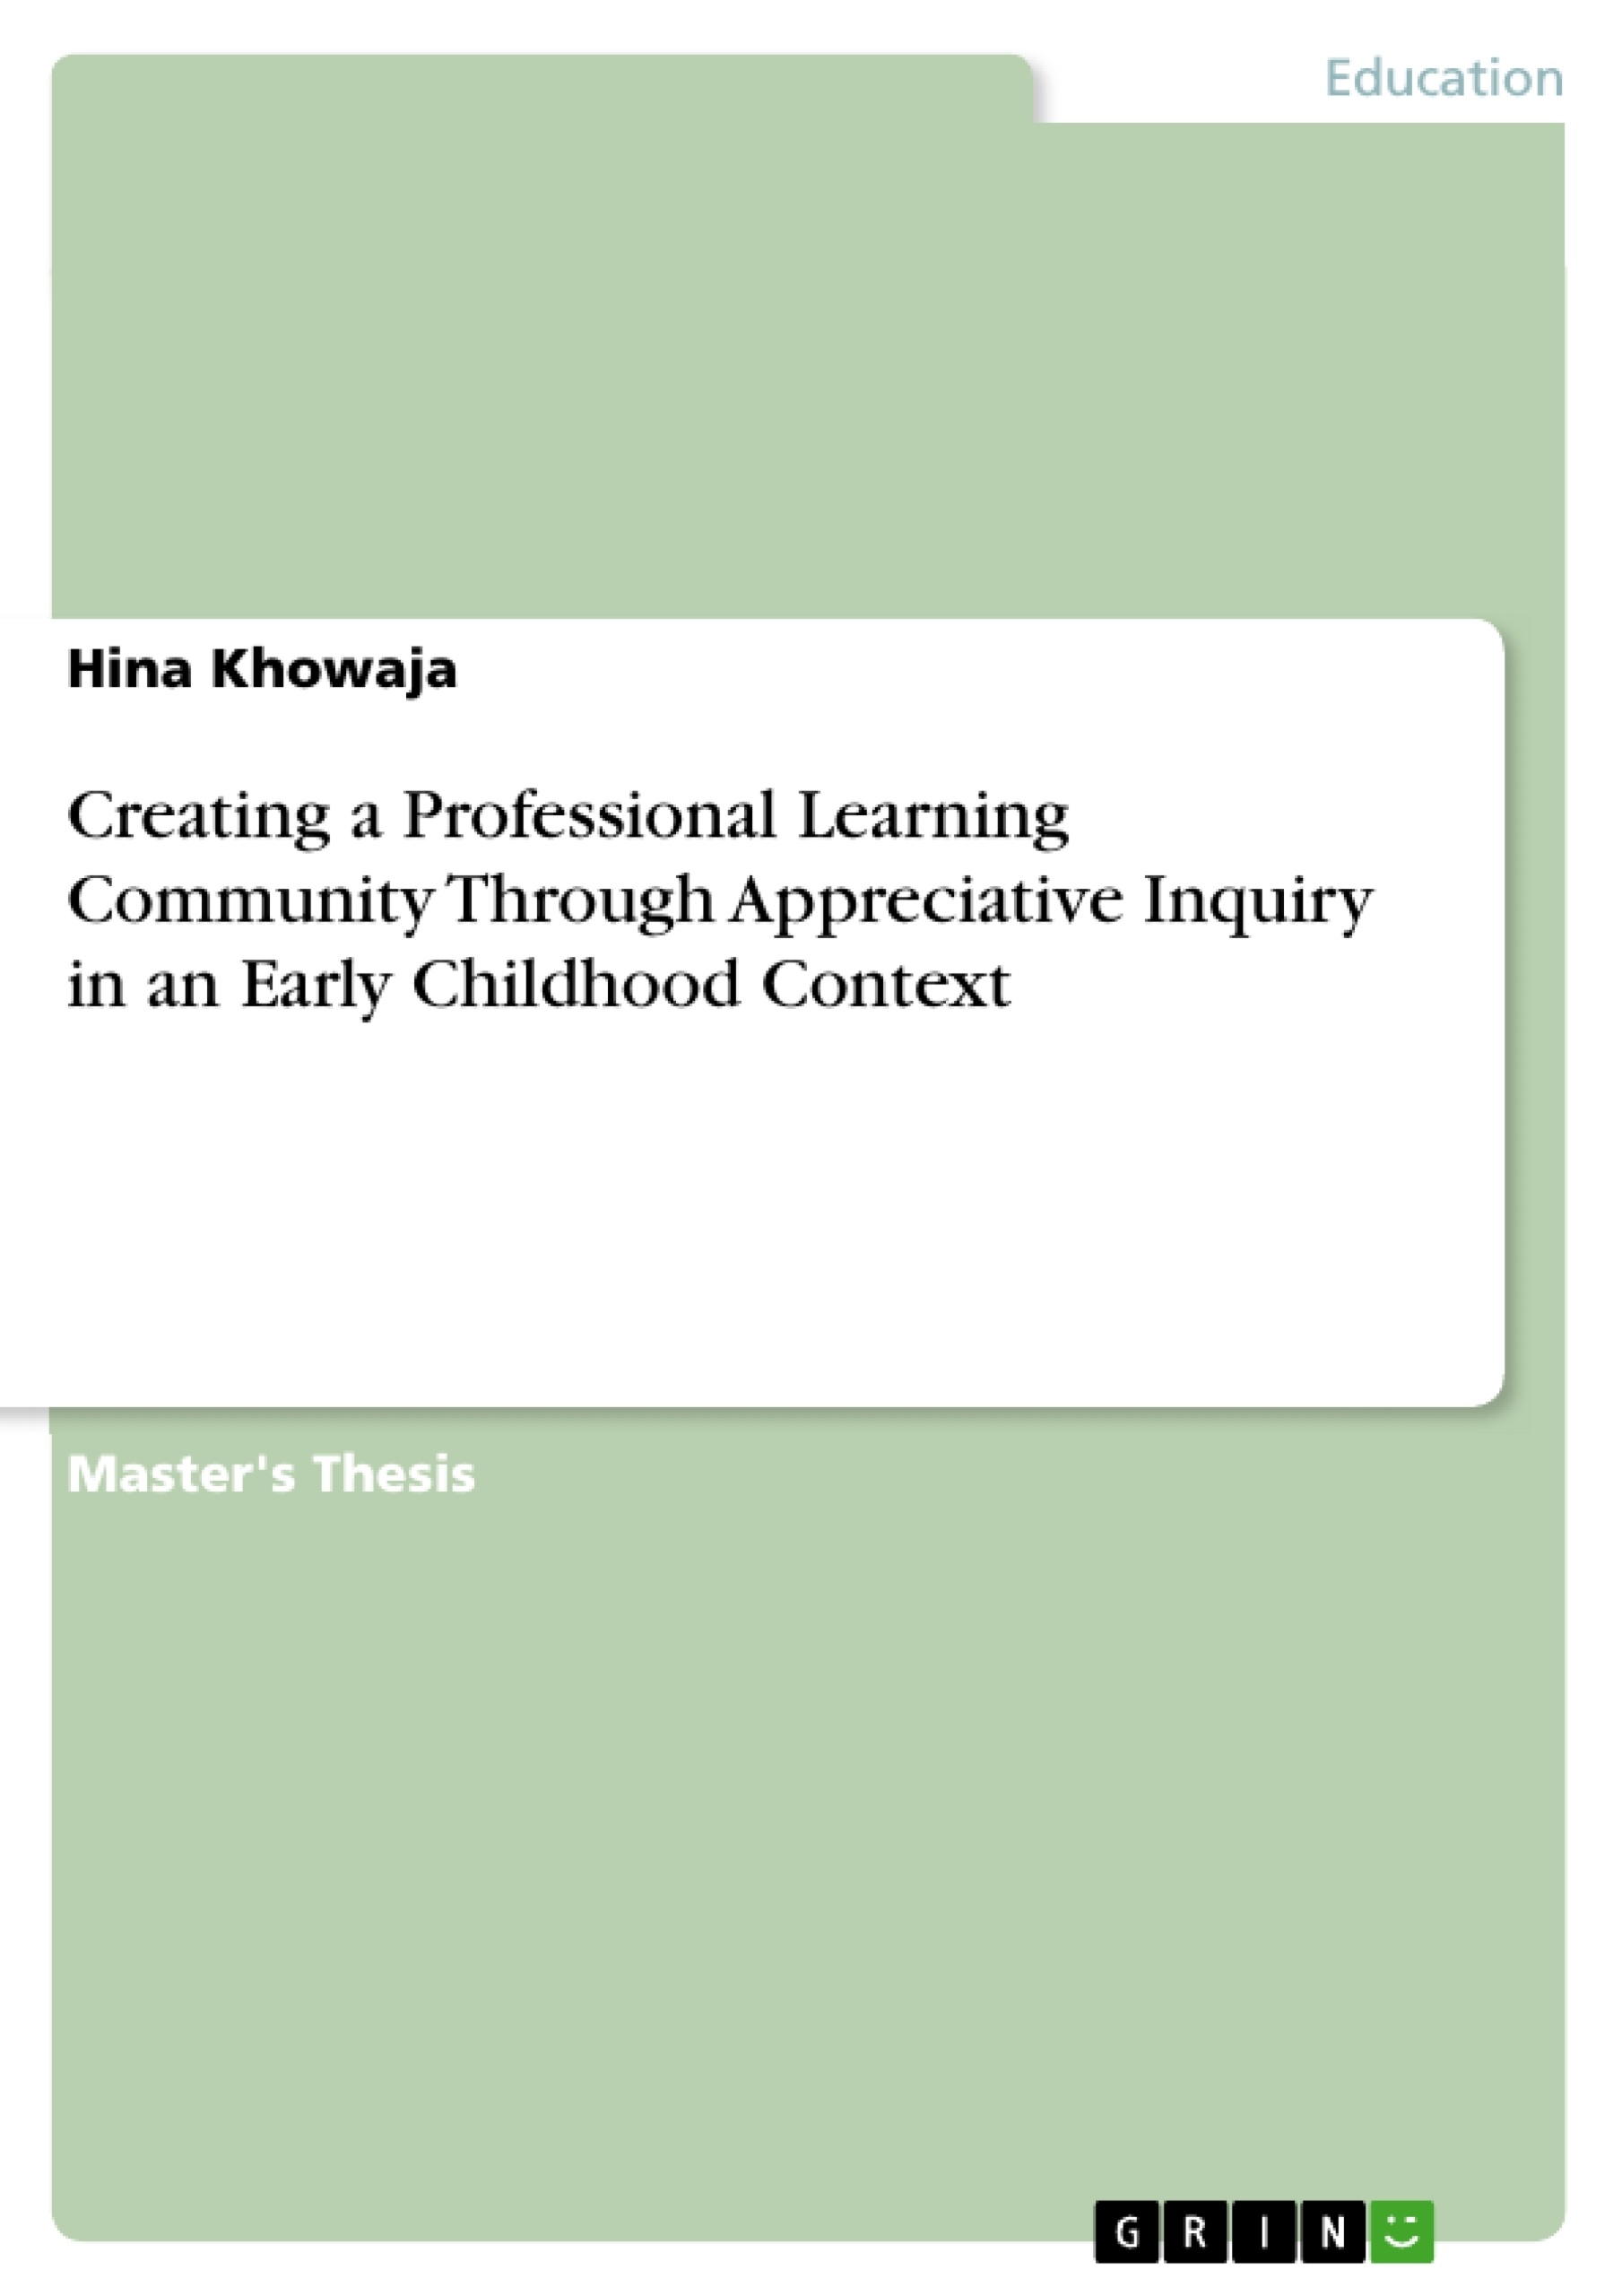 Título: Creating a Professional Learning Community Through Appreciative Inquiry in an Early Childhood Context